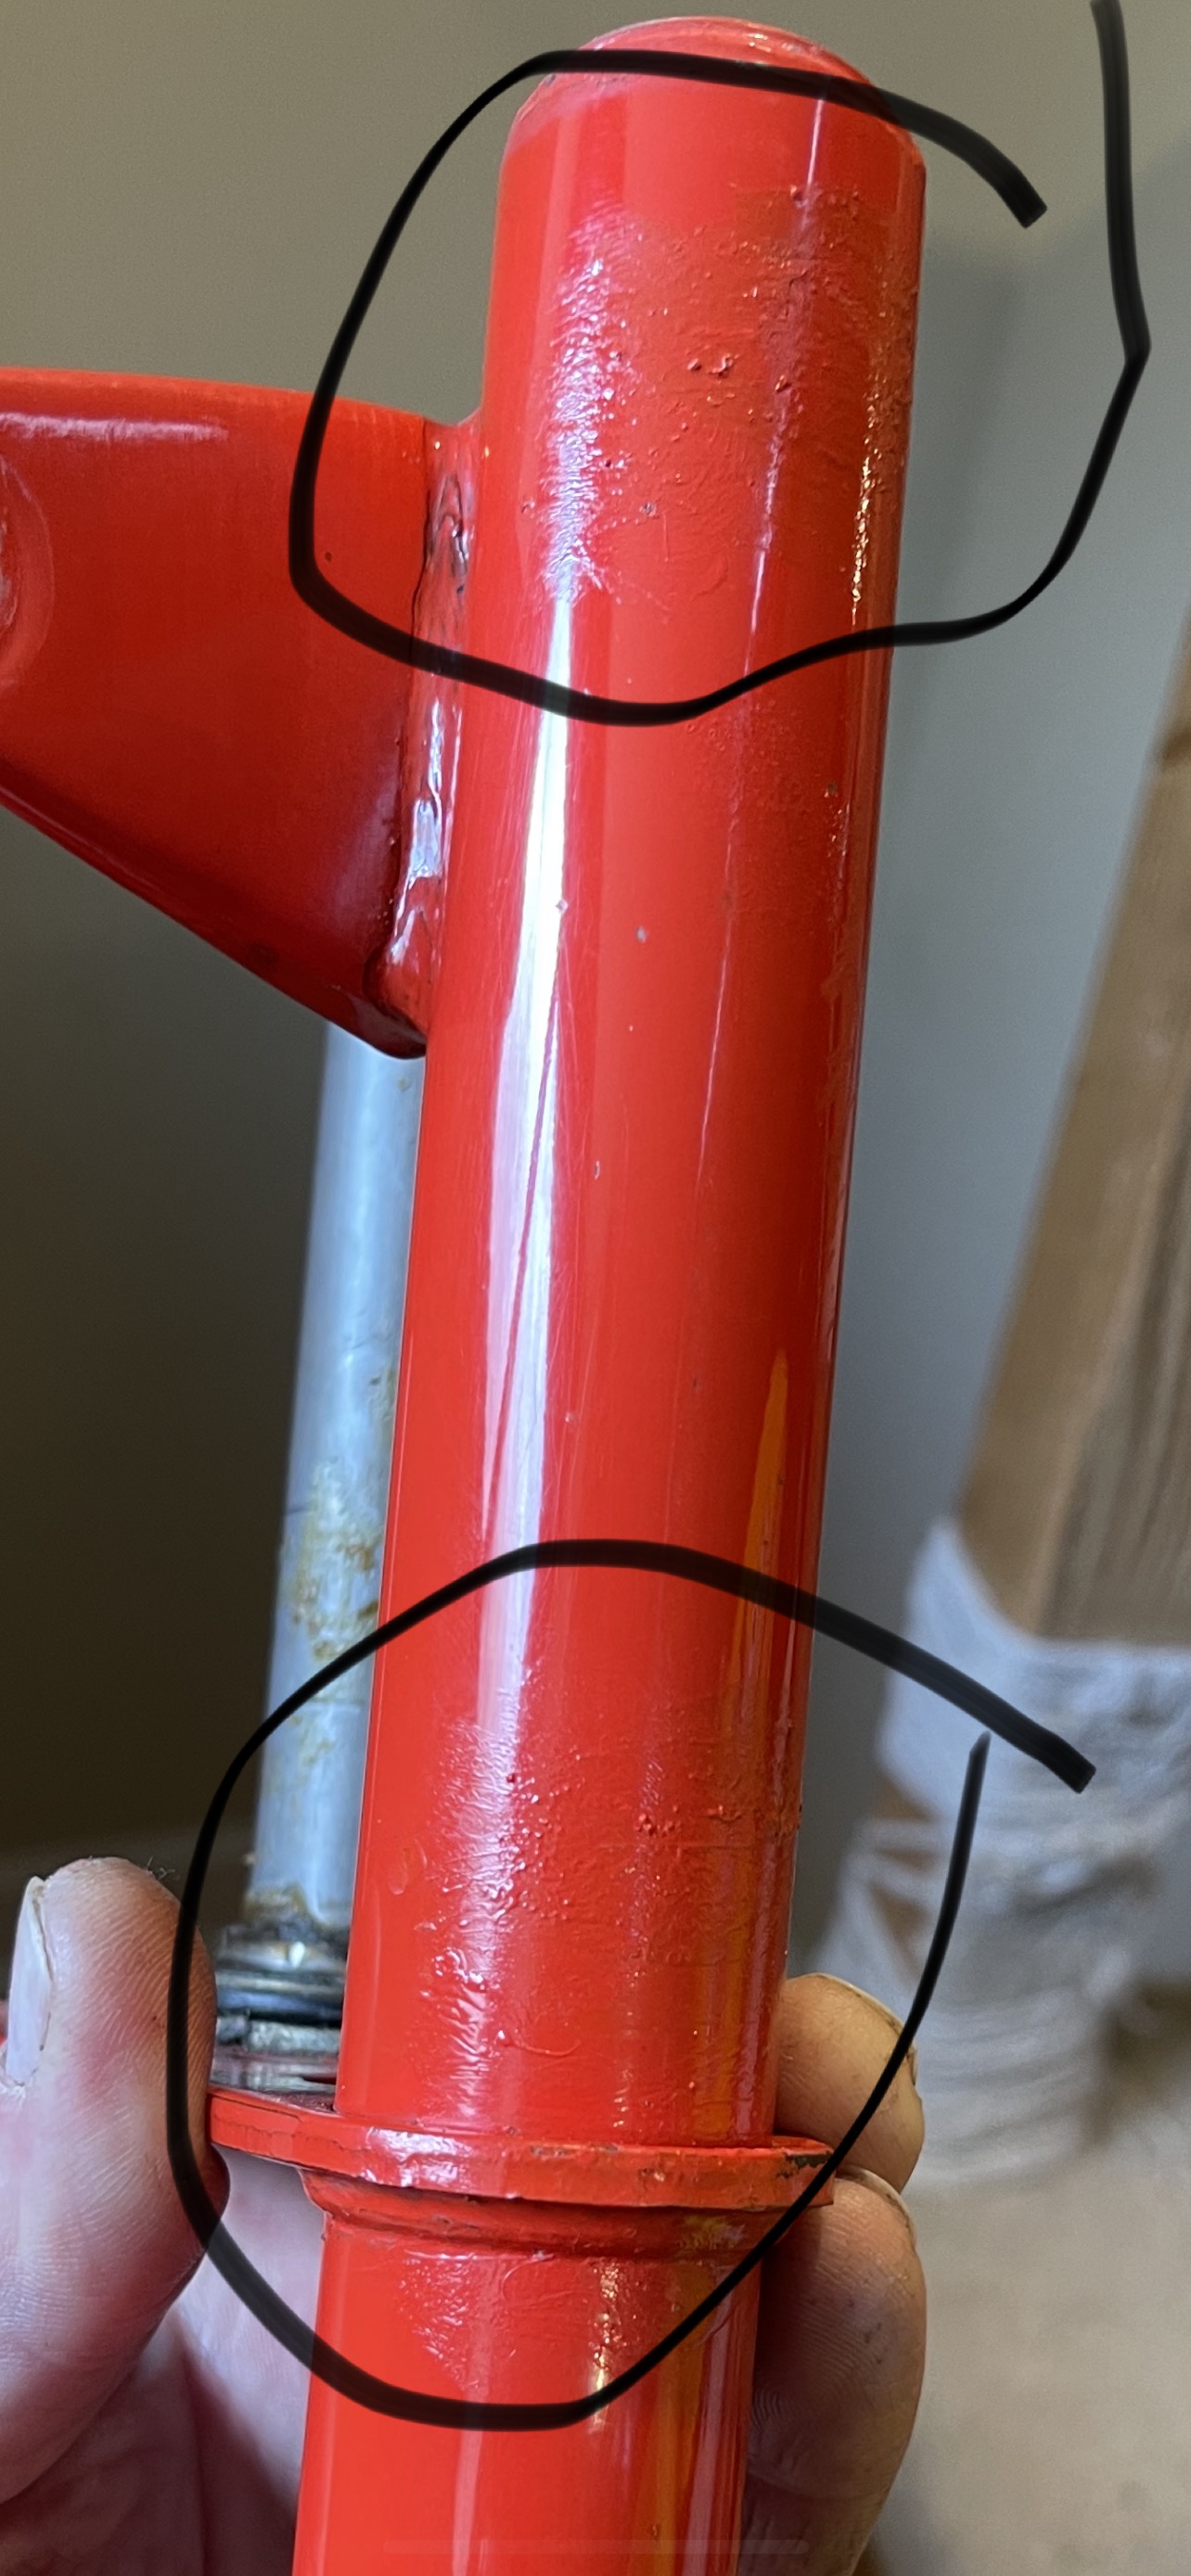 bad repaint/touch up on the front forks